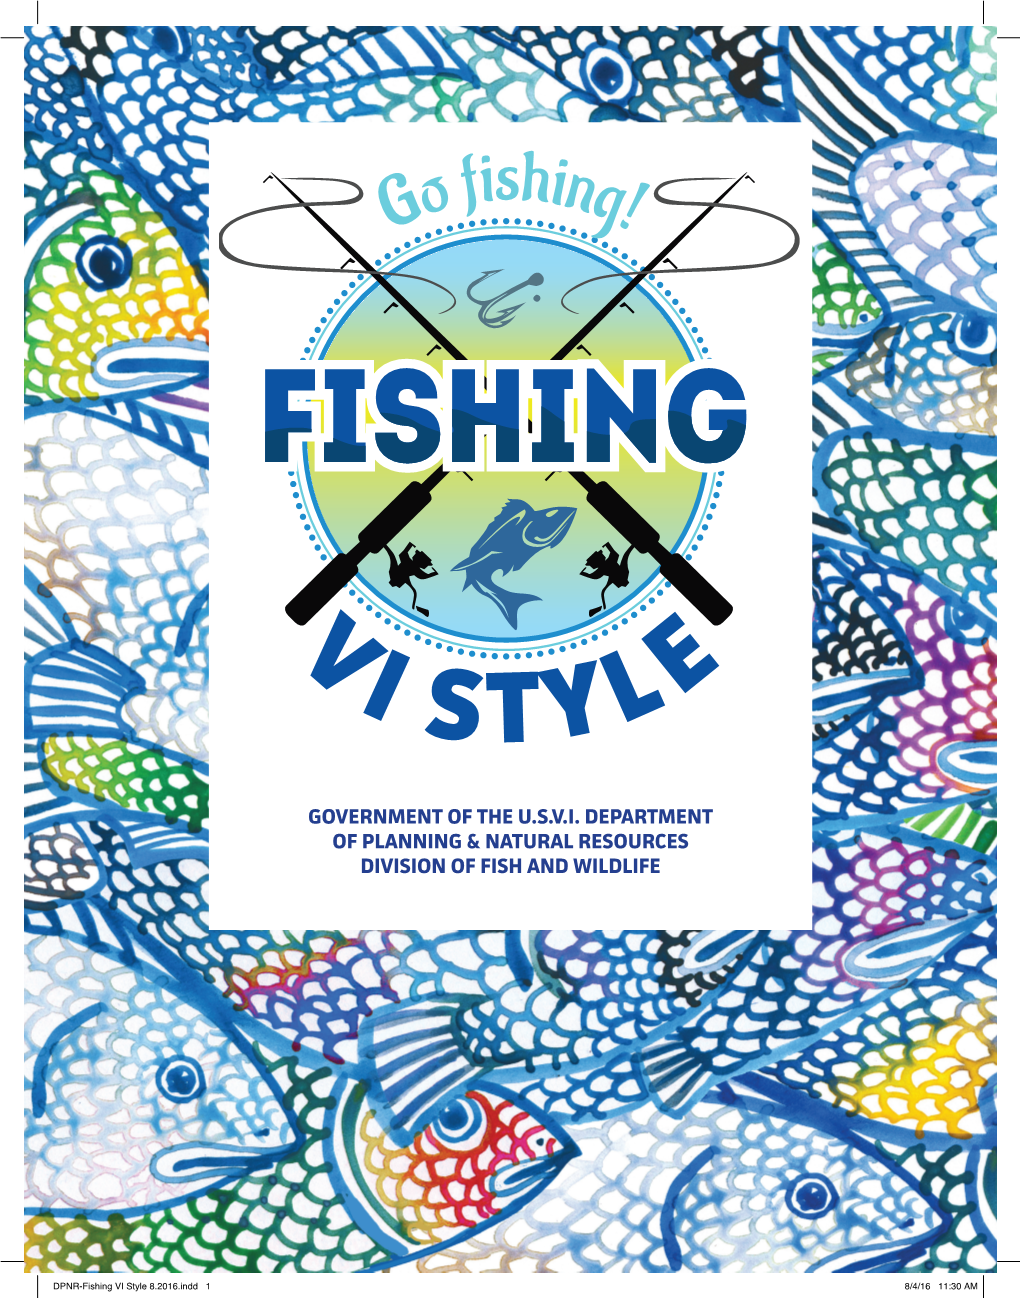 DPNR-Fishing VI Style 8.2016.Indd 1 8/4/16 11:30 AM Fishing VI Style It’S Catching On